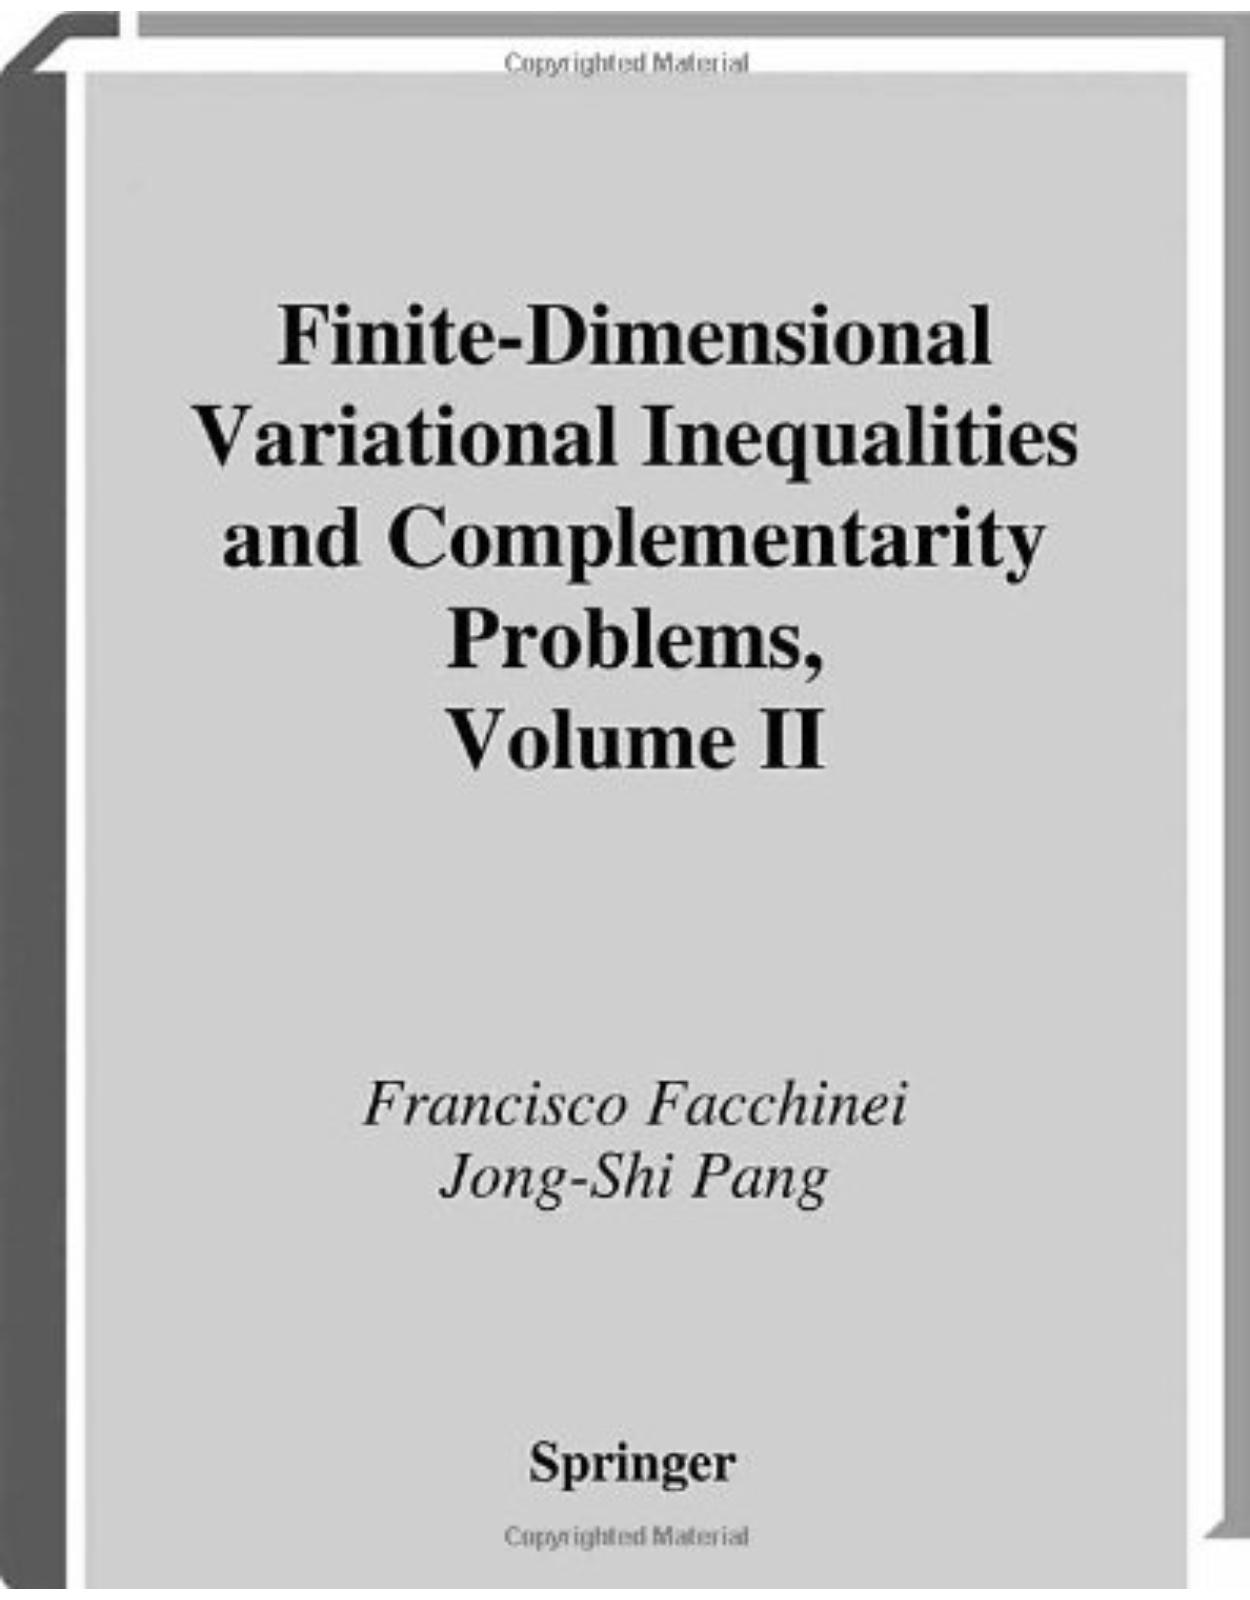 Finite-Dimensional Variational Inequalities and Complementarity Problems: v. 2 (Springer Series in Operations Research and Financial Engineering)